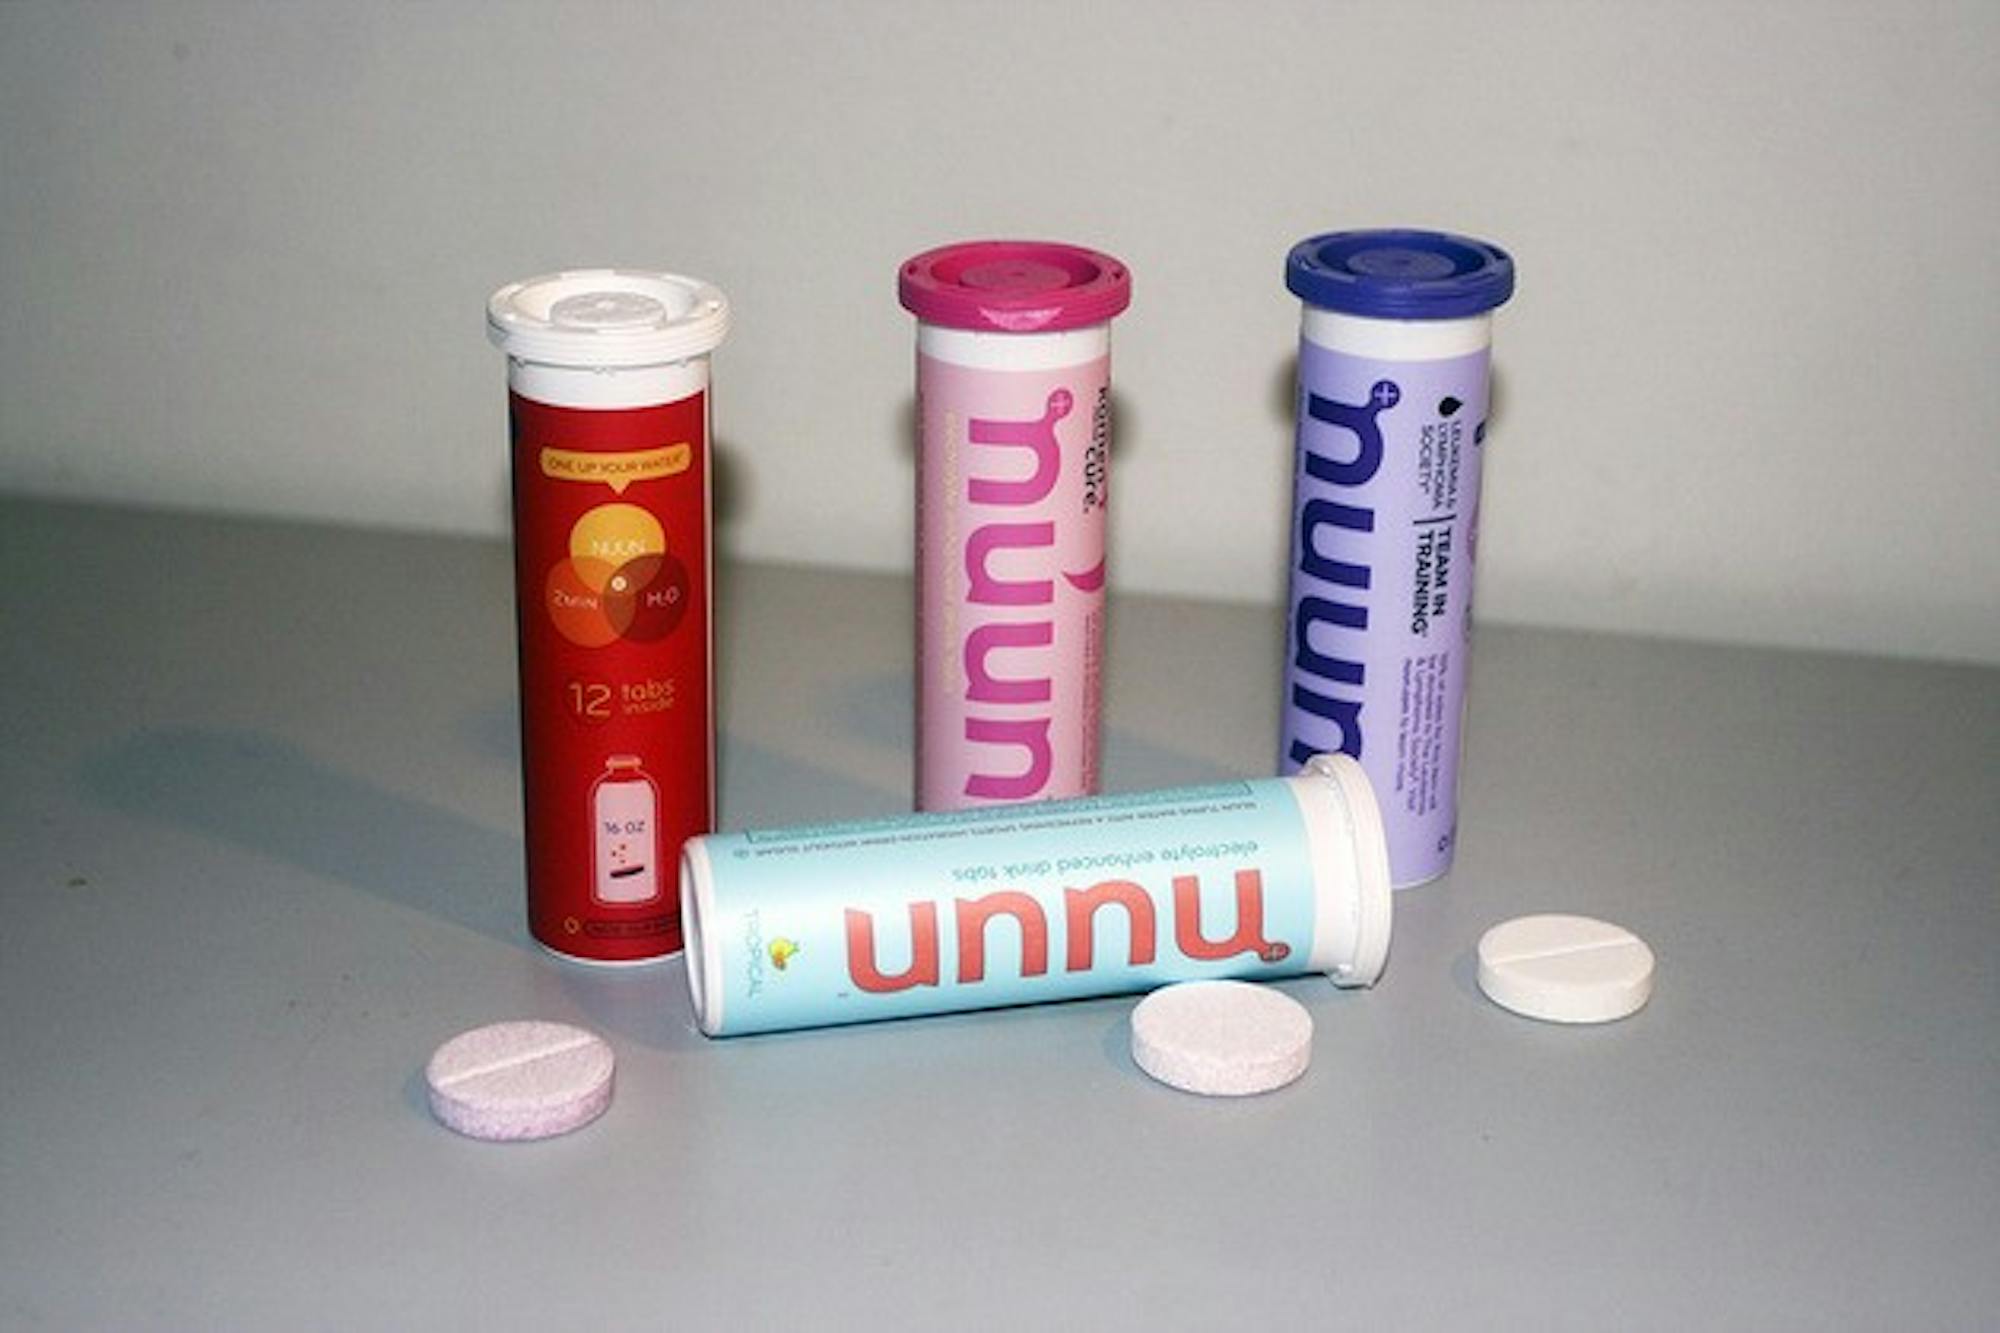 Nuun & Co., founded by Tim Moxey Tu'01 in 2004, markets dissolvable tablets that take the place of sports drinks and eliminate excess sugar.